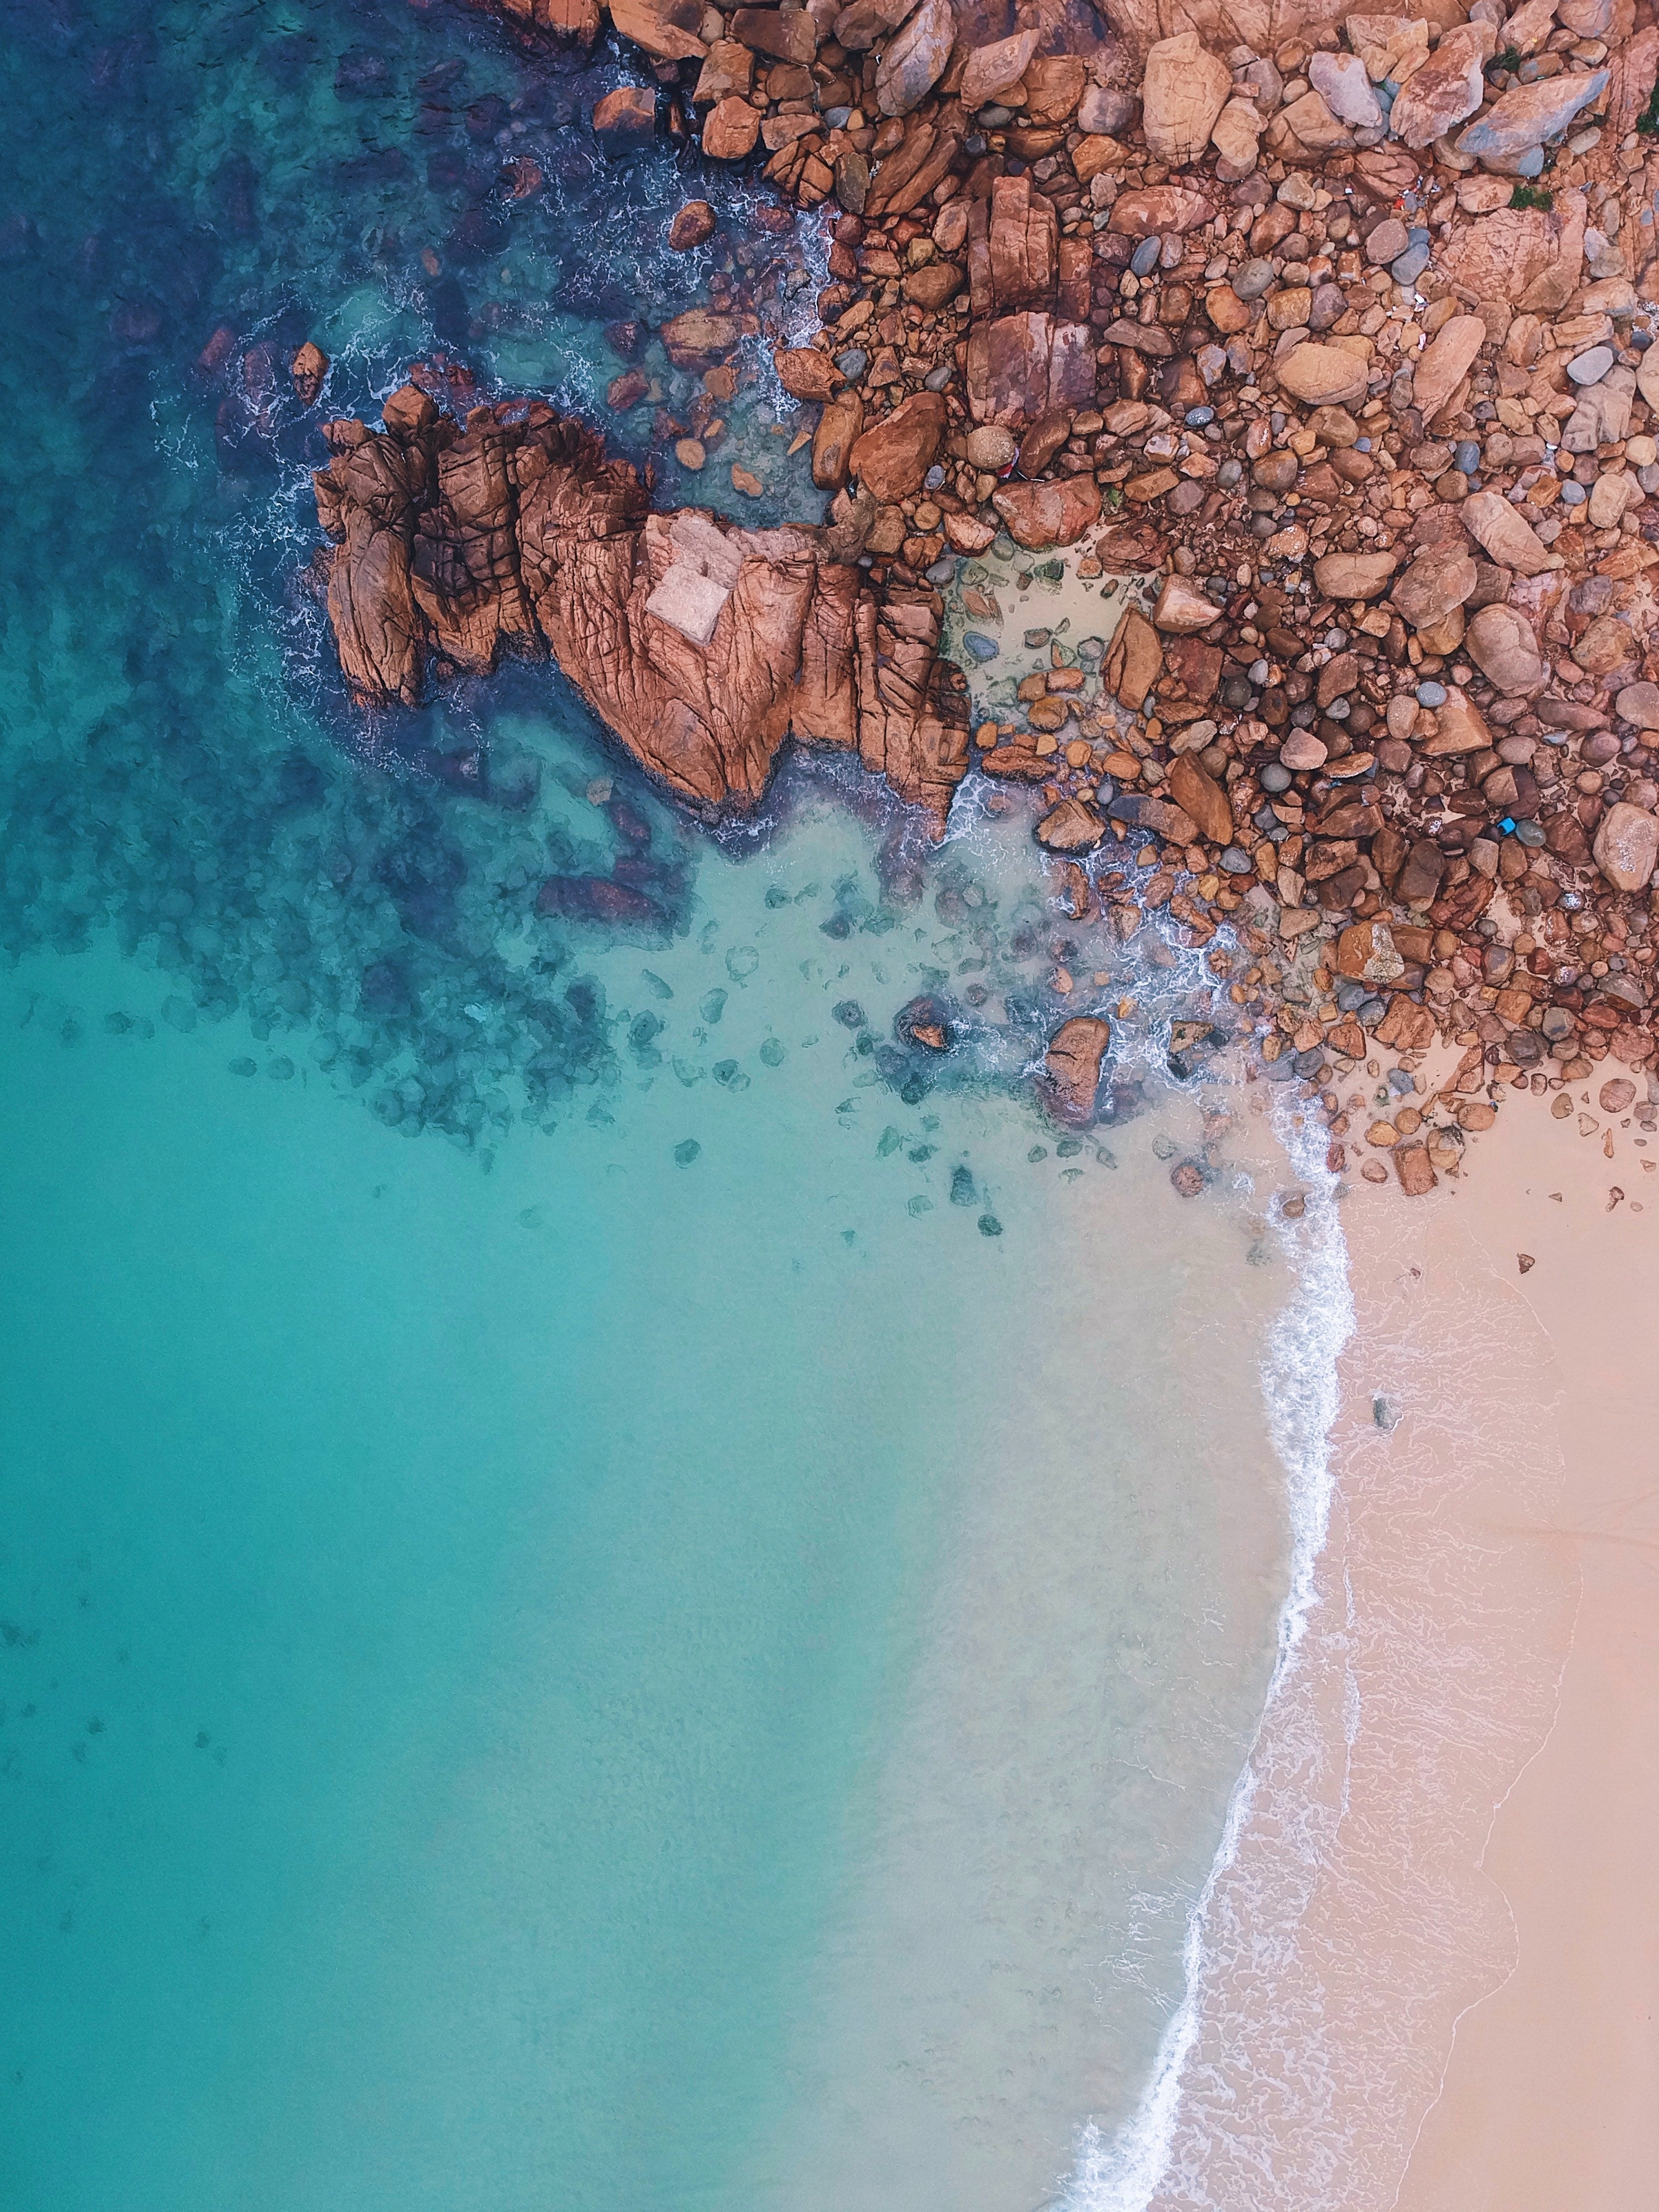 sand, view from above, stones, nature, water, ocean UHD